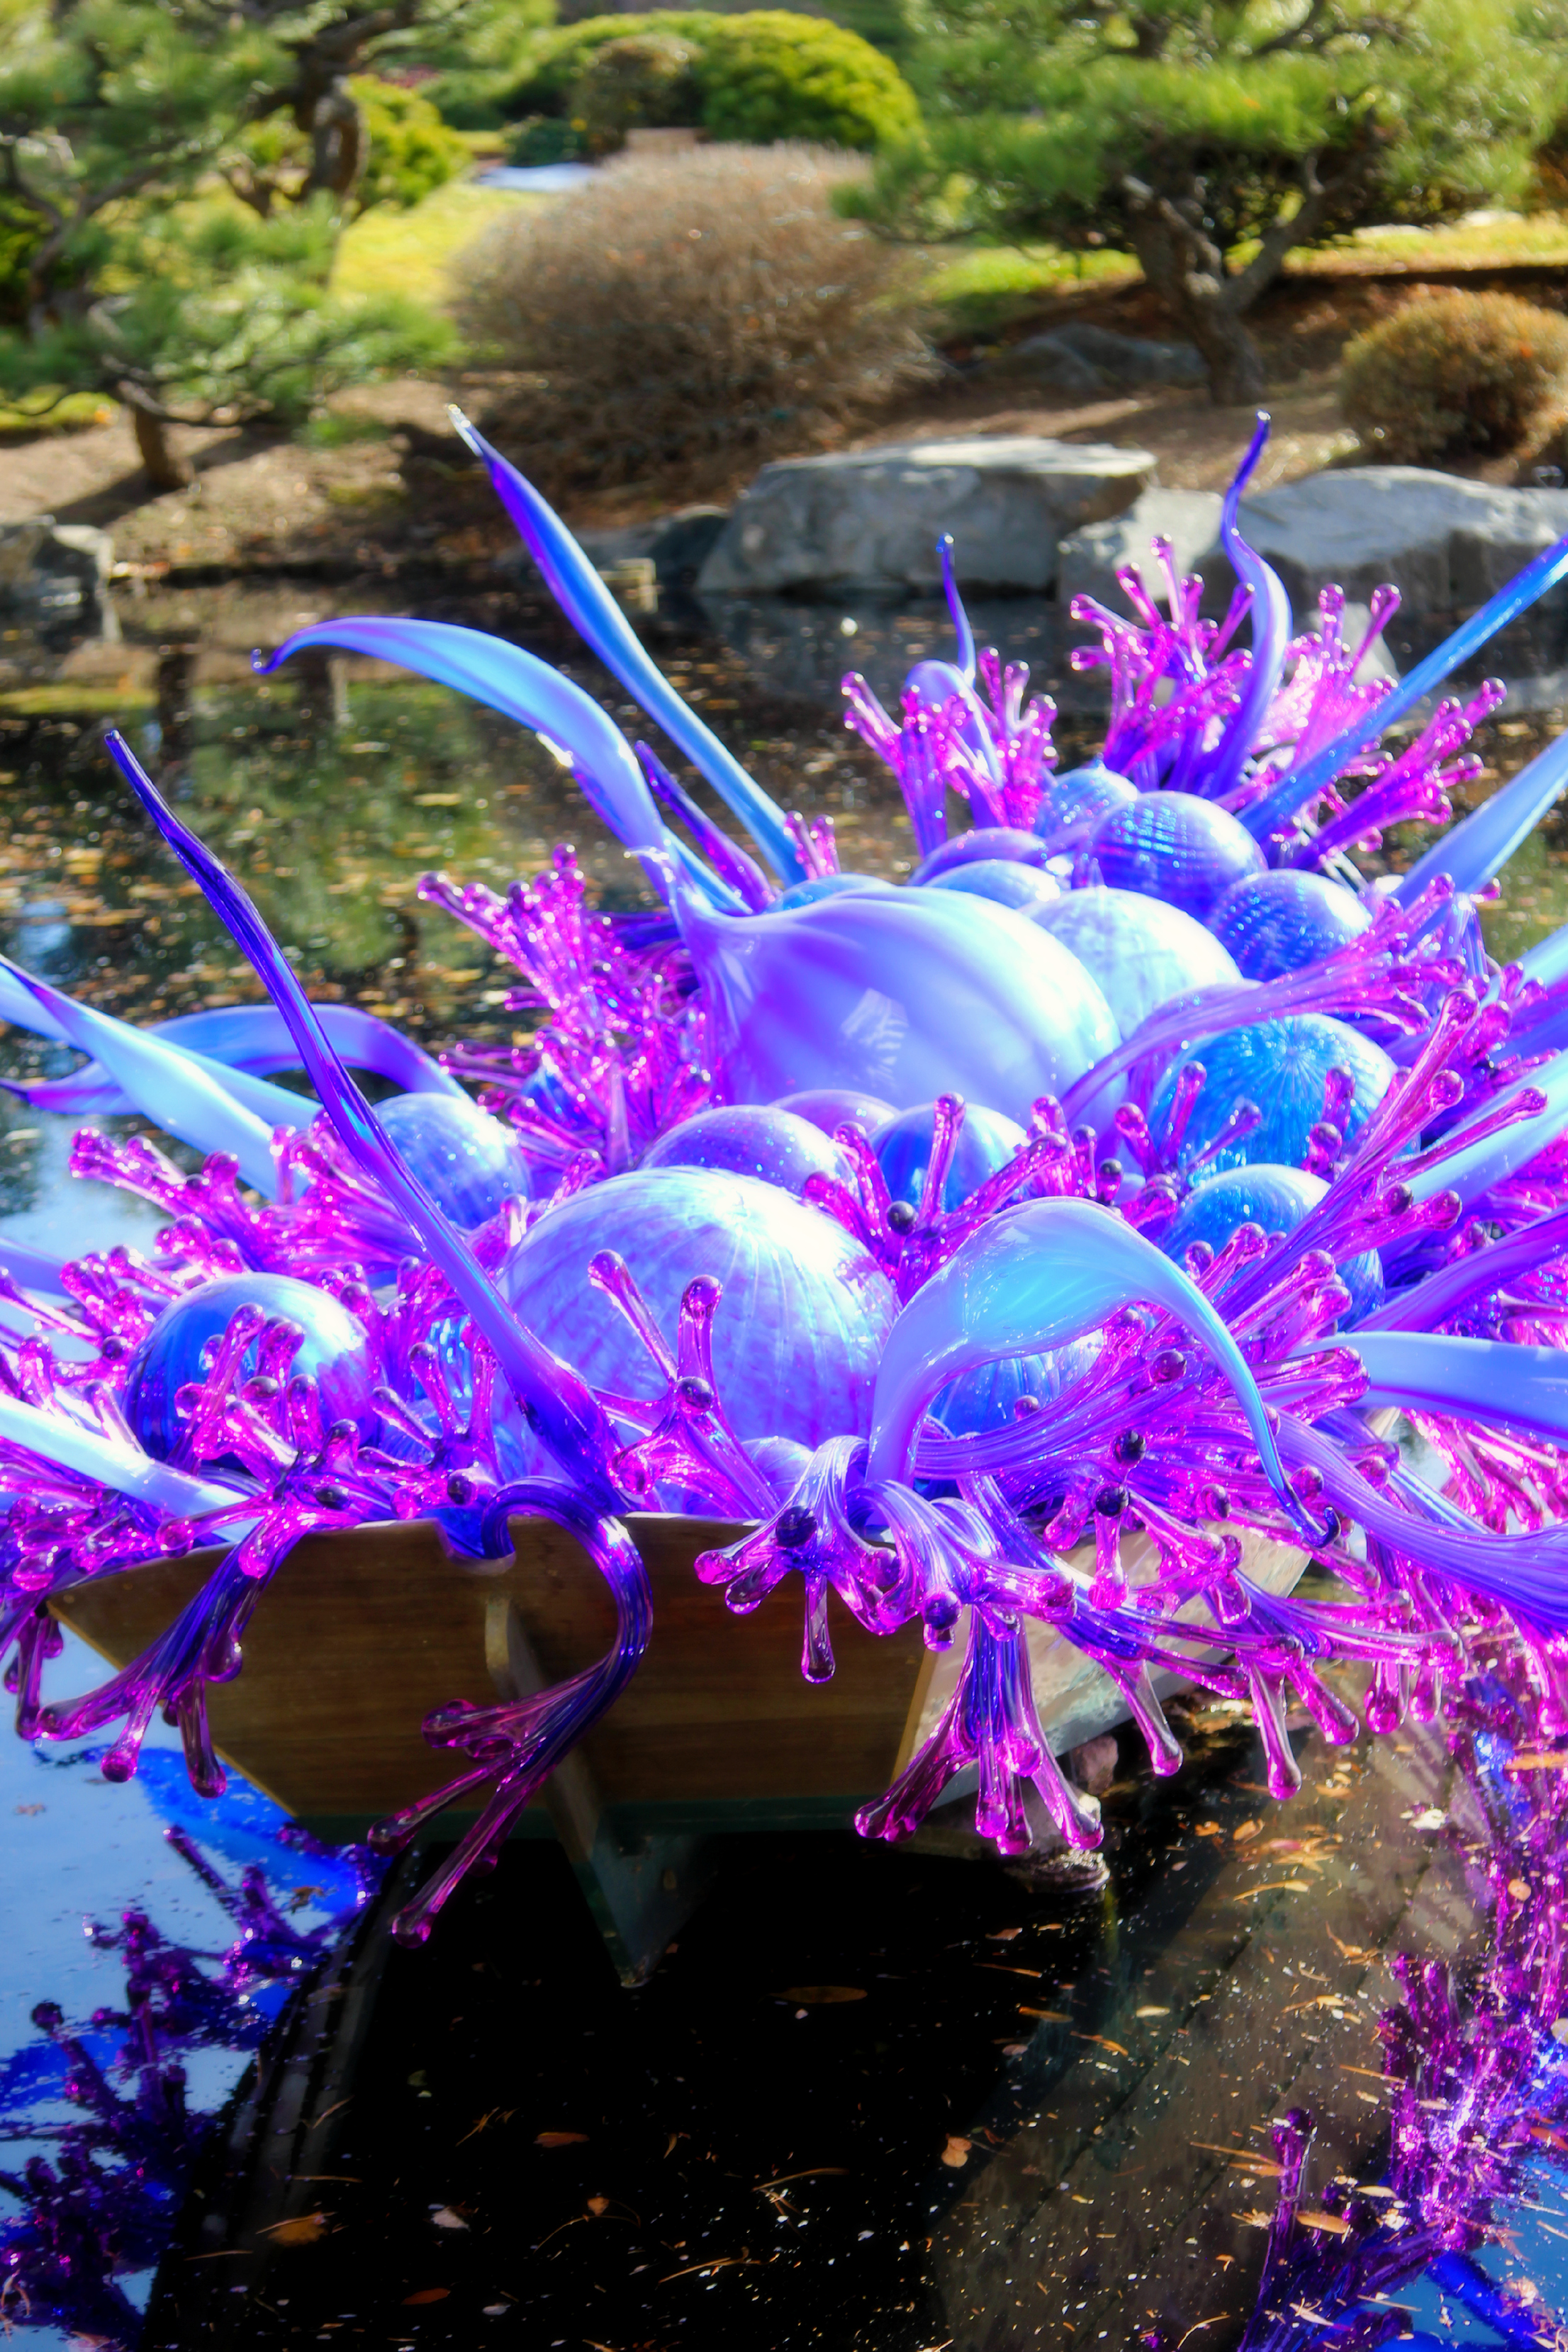 Favorite Color-Chihuly